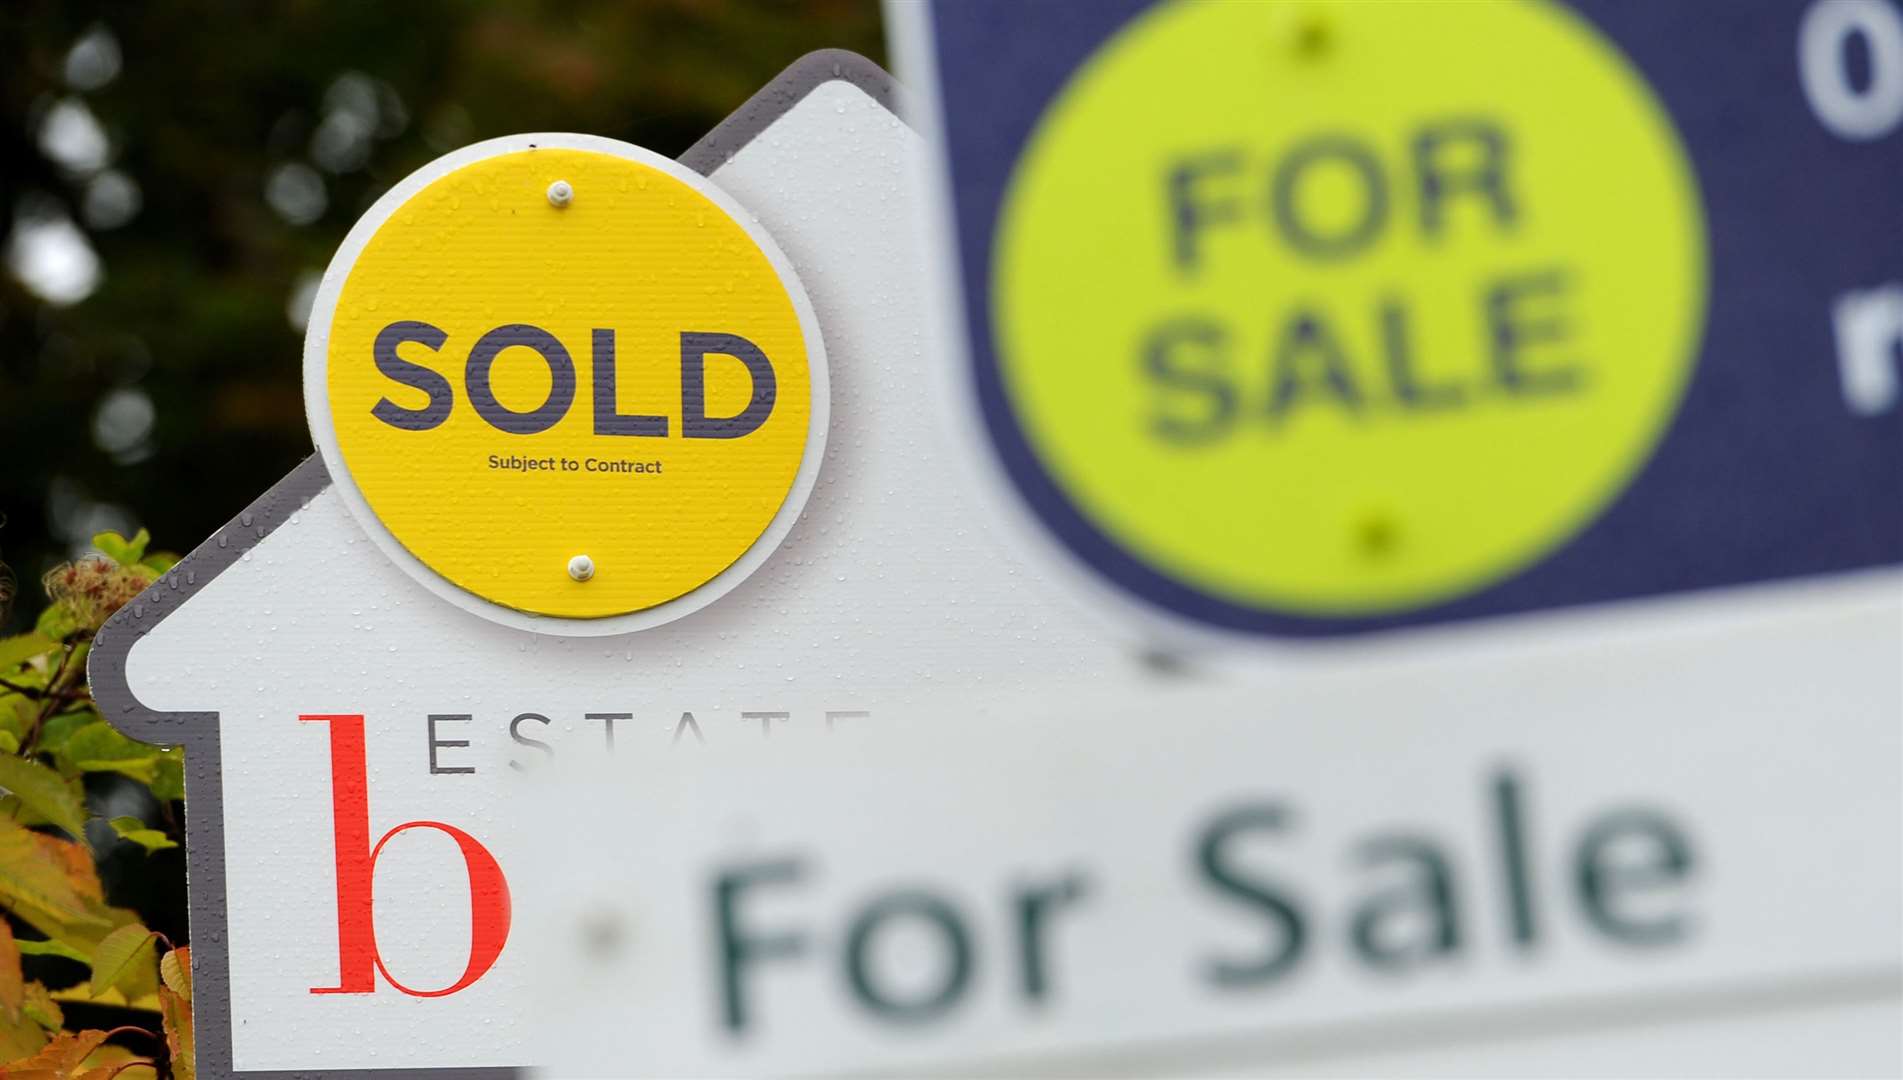 Dartford was named among the quickest places to sell your home in the UK according to GetAgent.co.uk